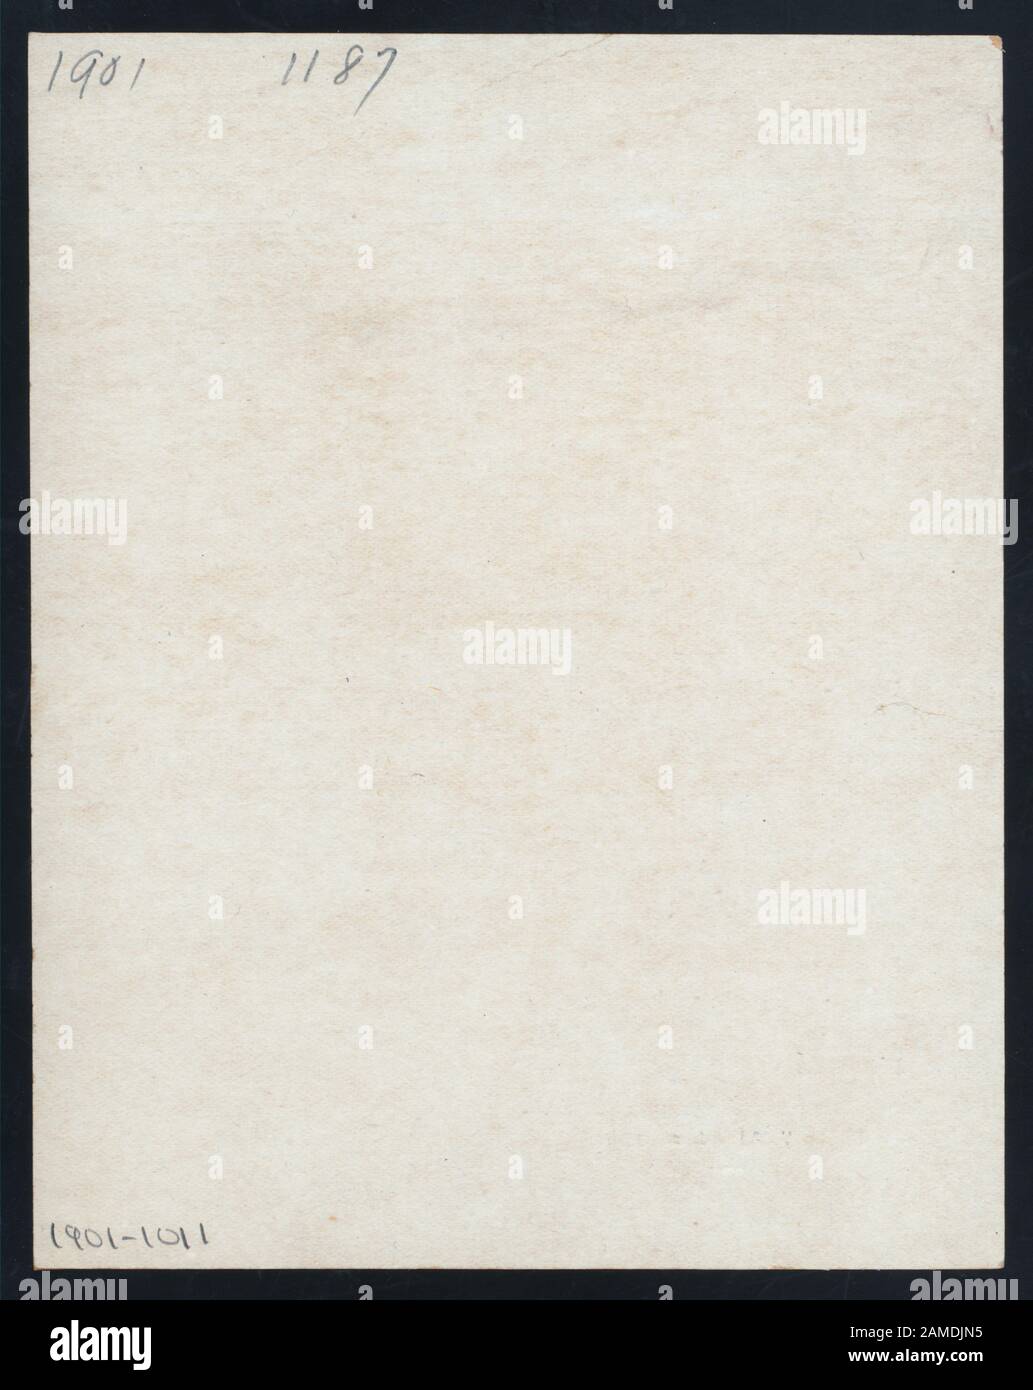 TABLE D'HOTE DINNER (held by) ROGERS'RESTAURANT (at) NEW YORK, NY (REST;)  WITH WINE-50 CENTS; TABLE D'HOTE DINNER [held by] ROGERS'RESTAURANT [at] NEW YORK, NY (REST;) Stock Photo